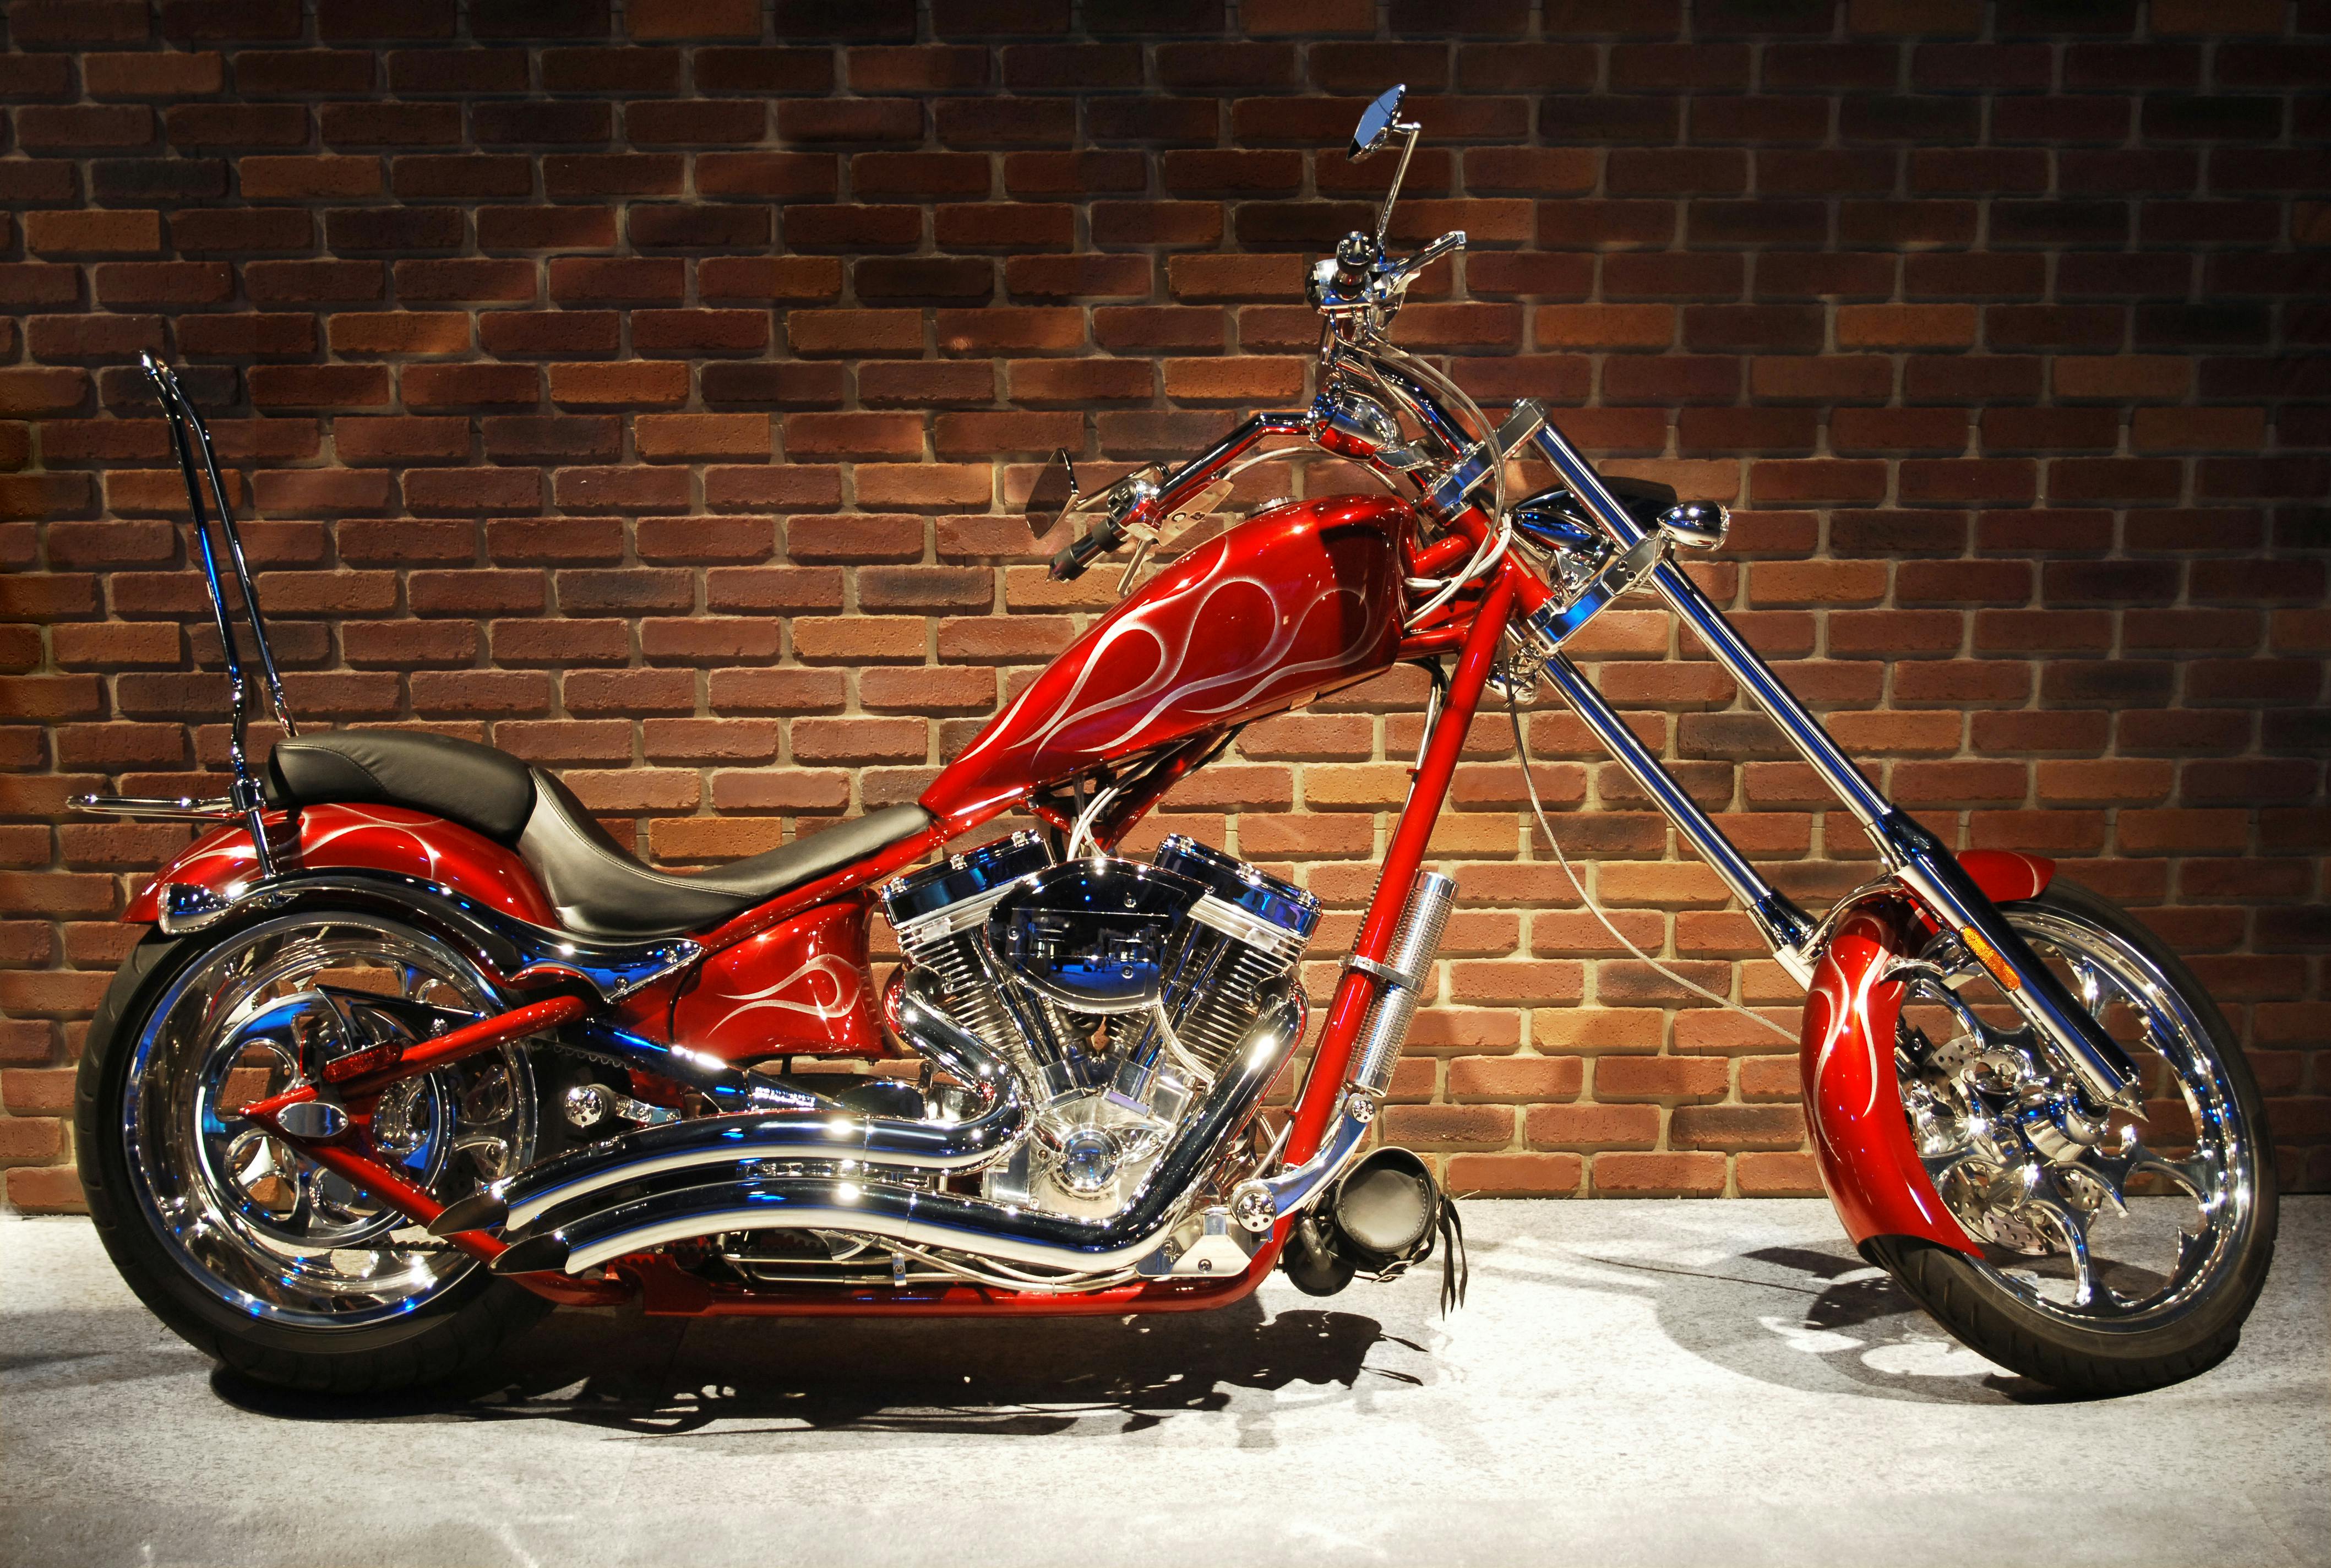 best off the lot chopper motorcycles and history of best choppers - photo of red custom build chopper motorcycle